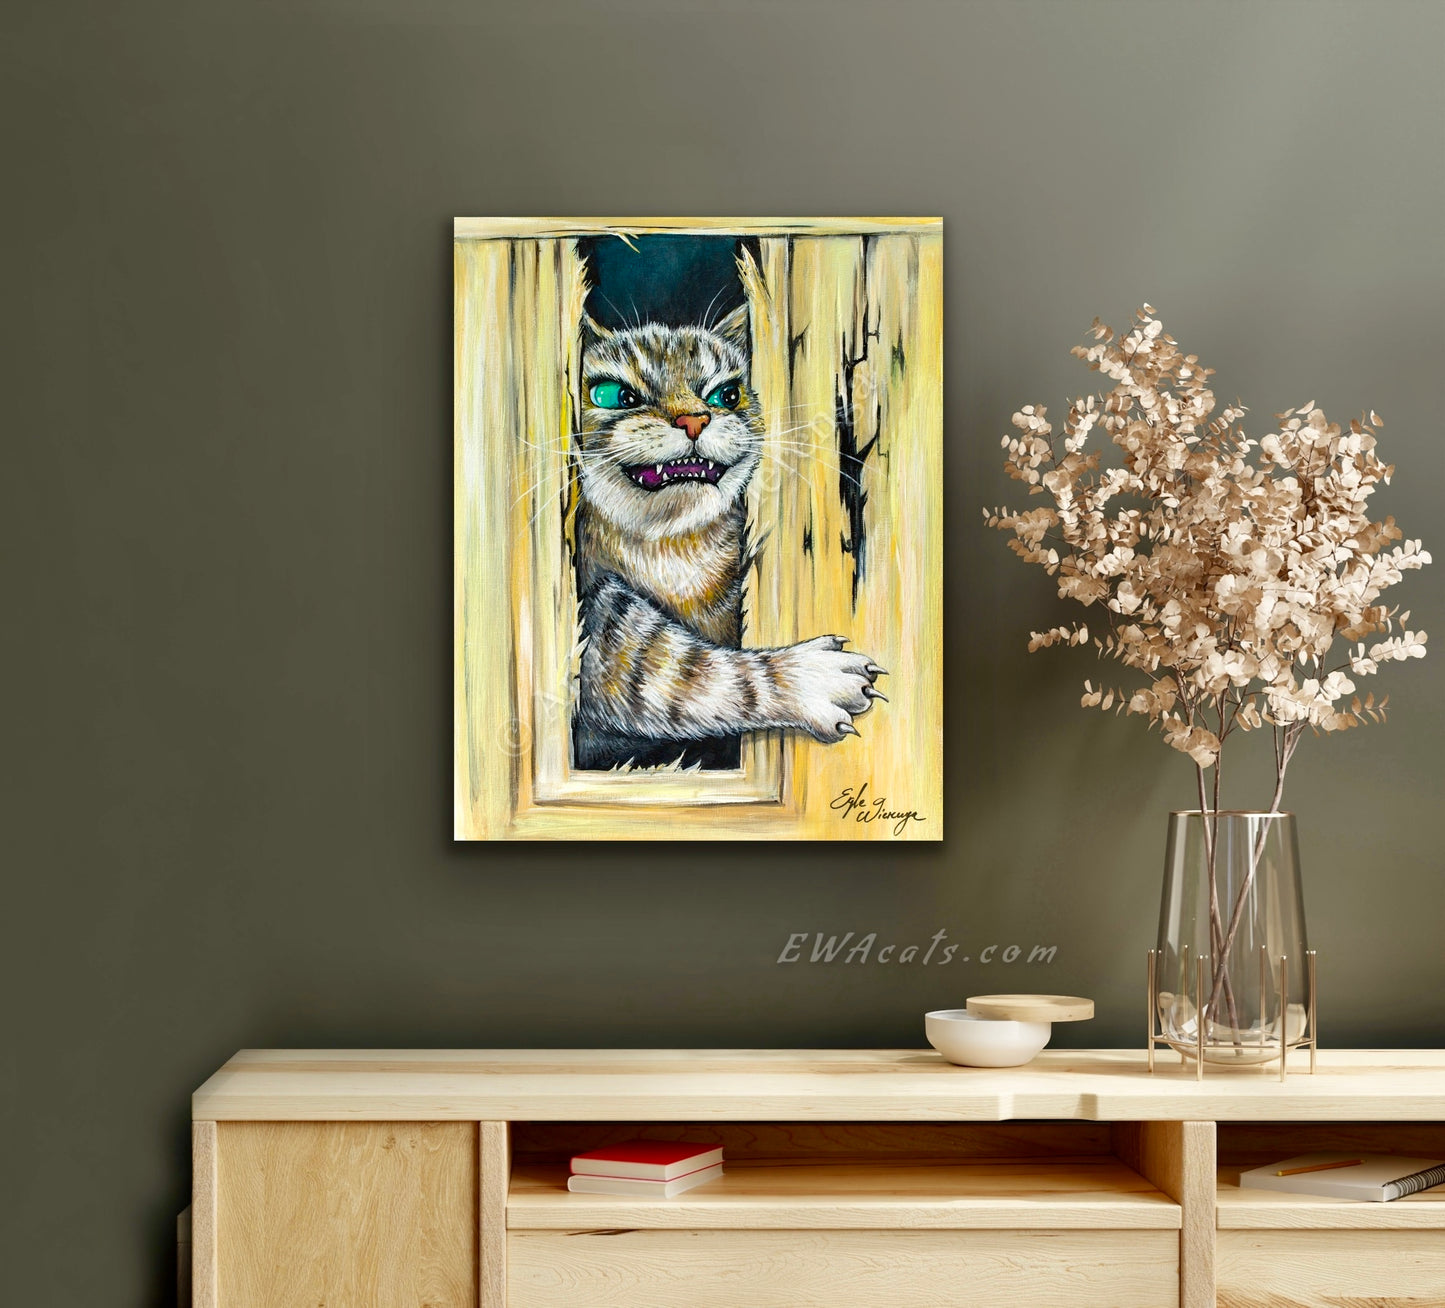 SUPREME MASTER CANVAS "Here's Kitty" Limited to 5!